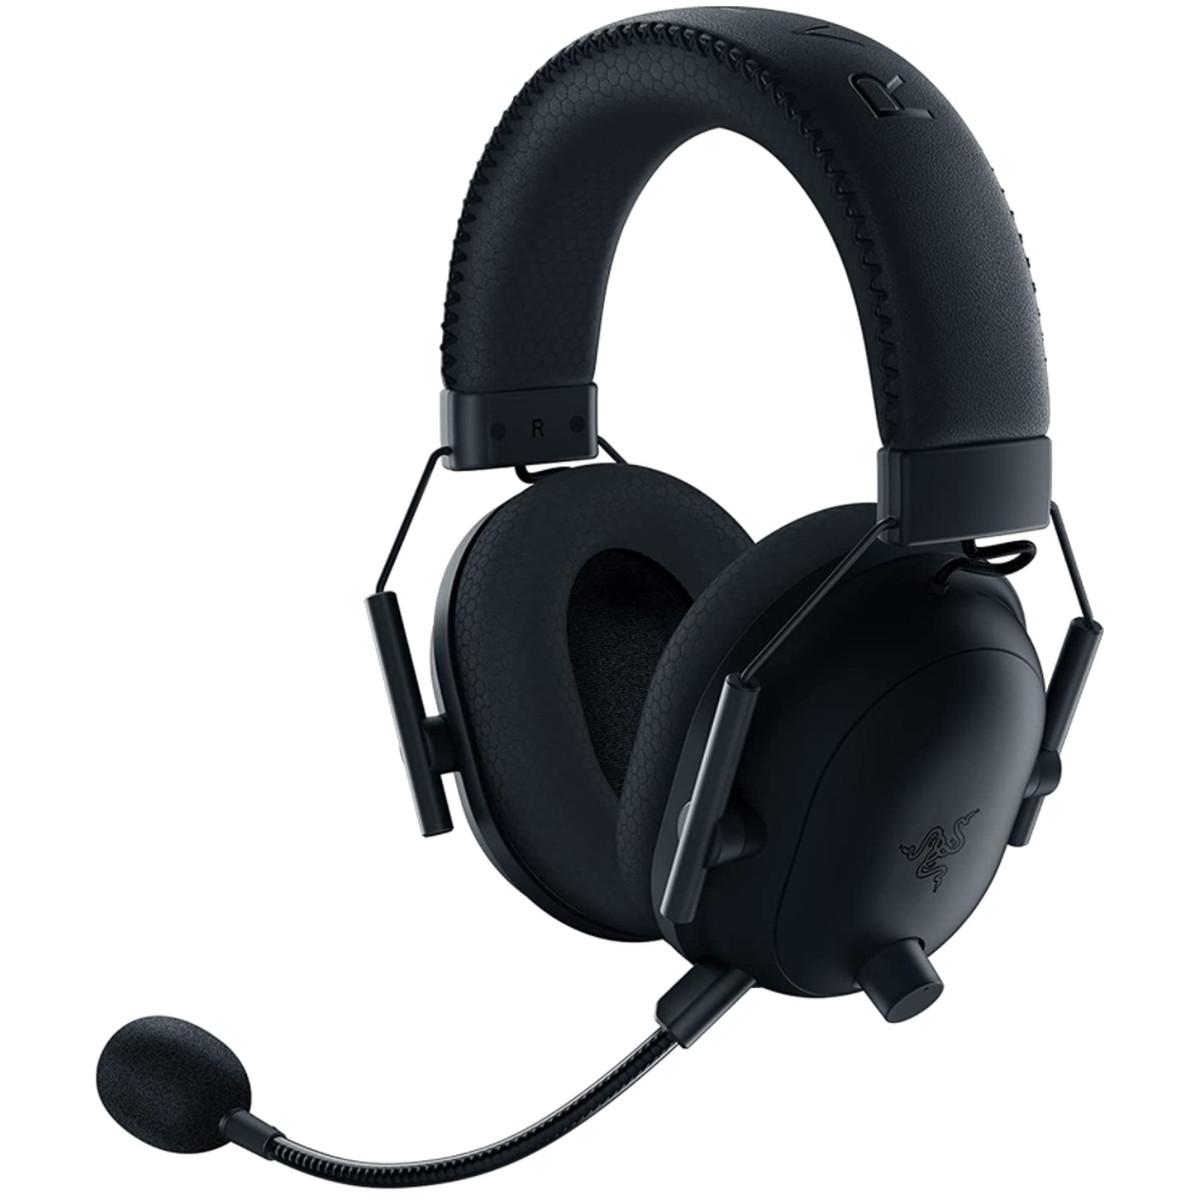 The best cheap gaming headset deals February 2022